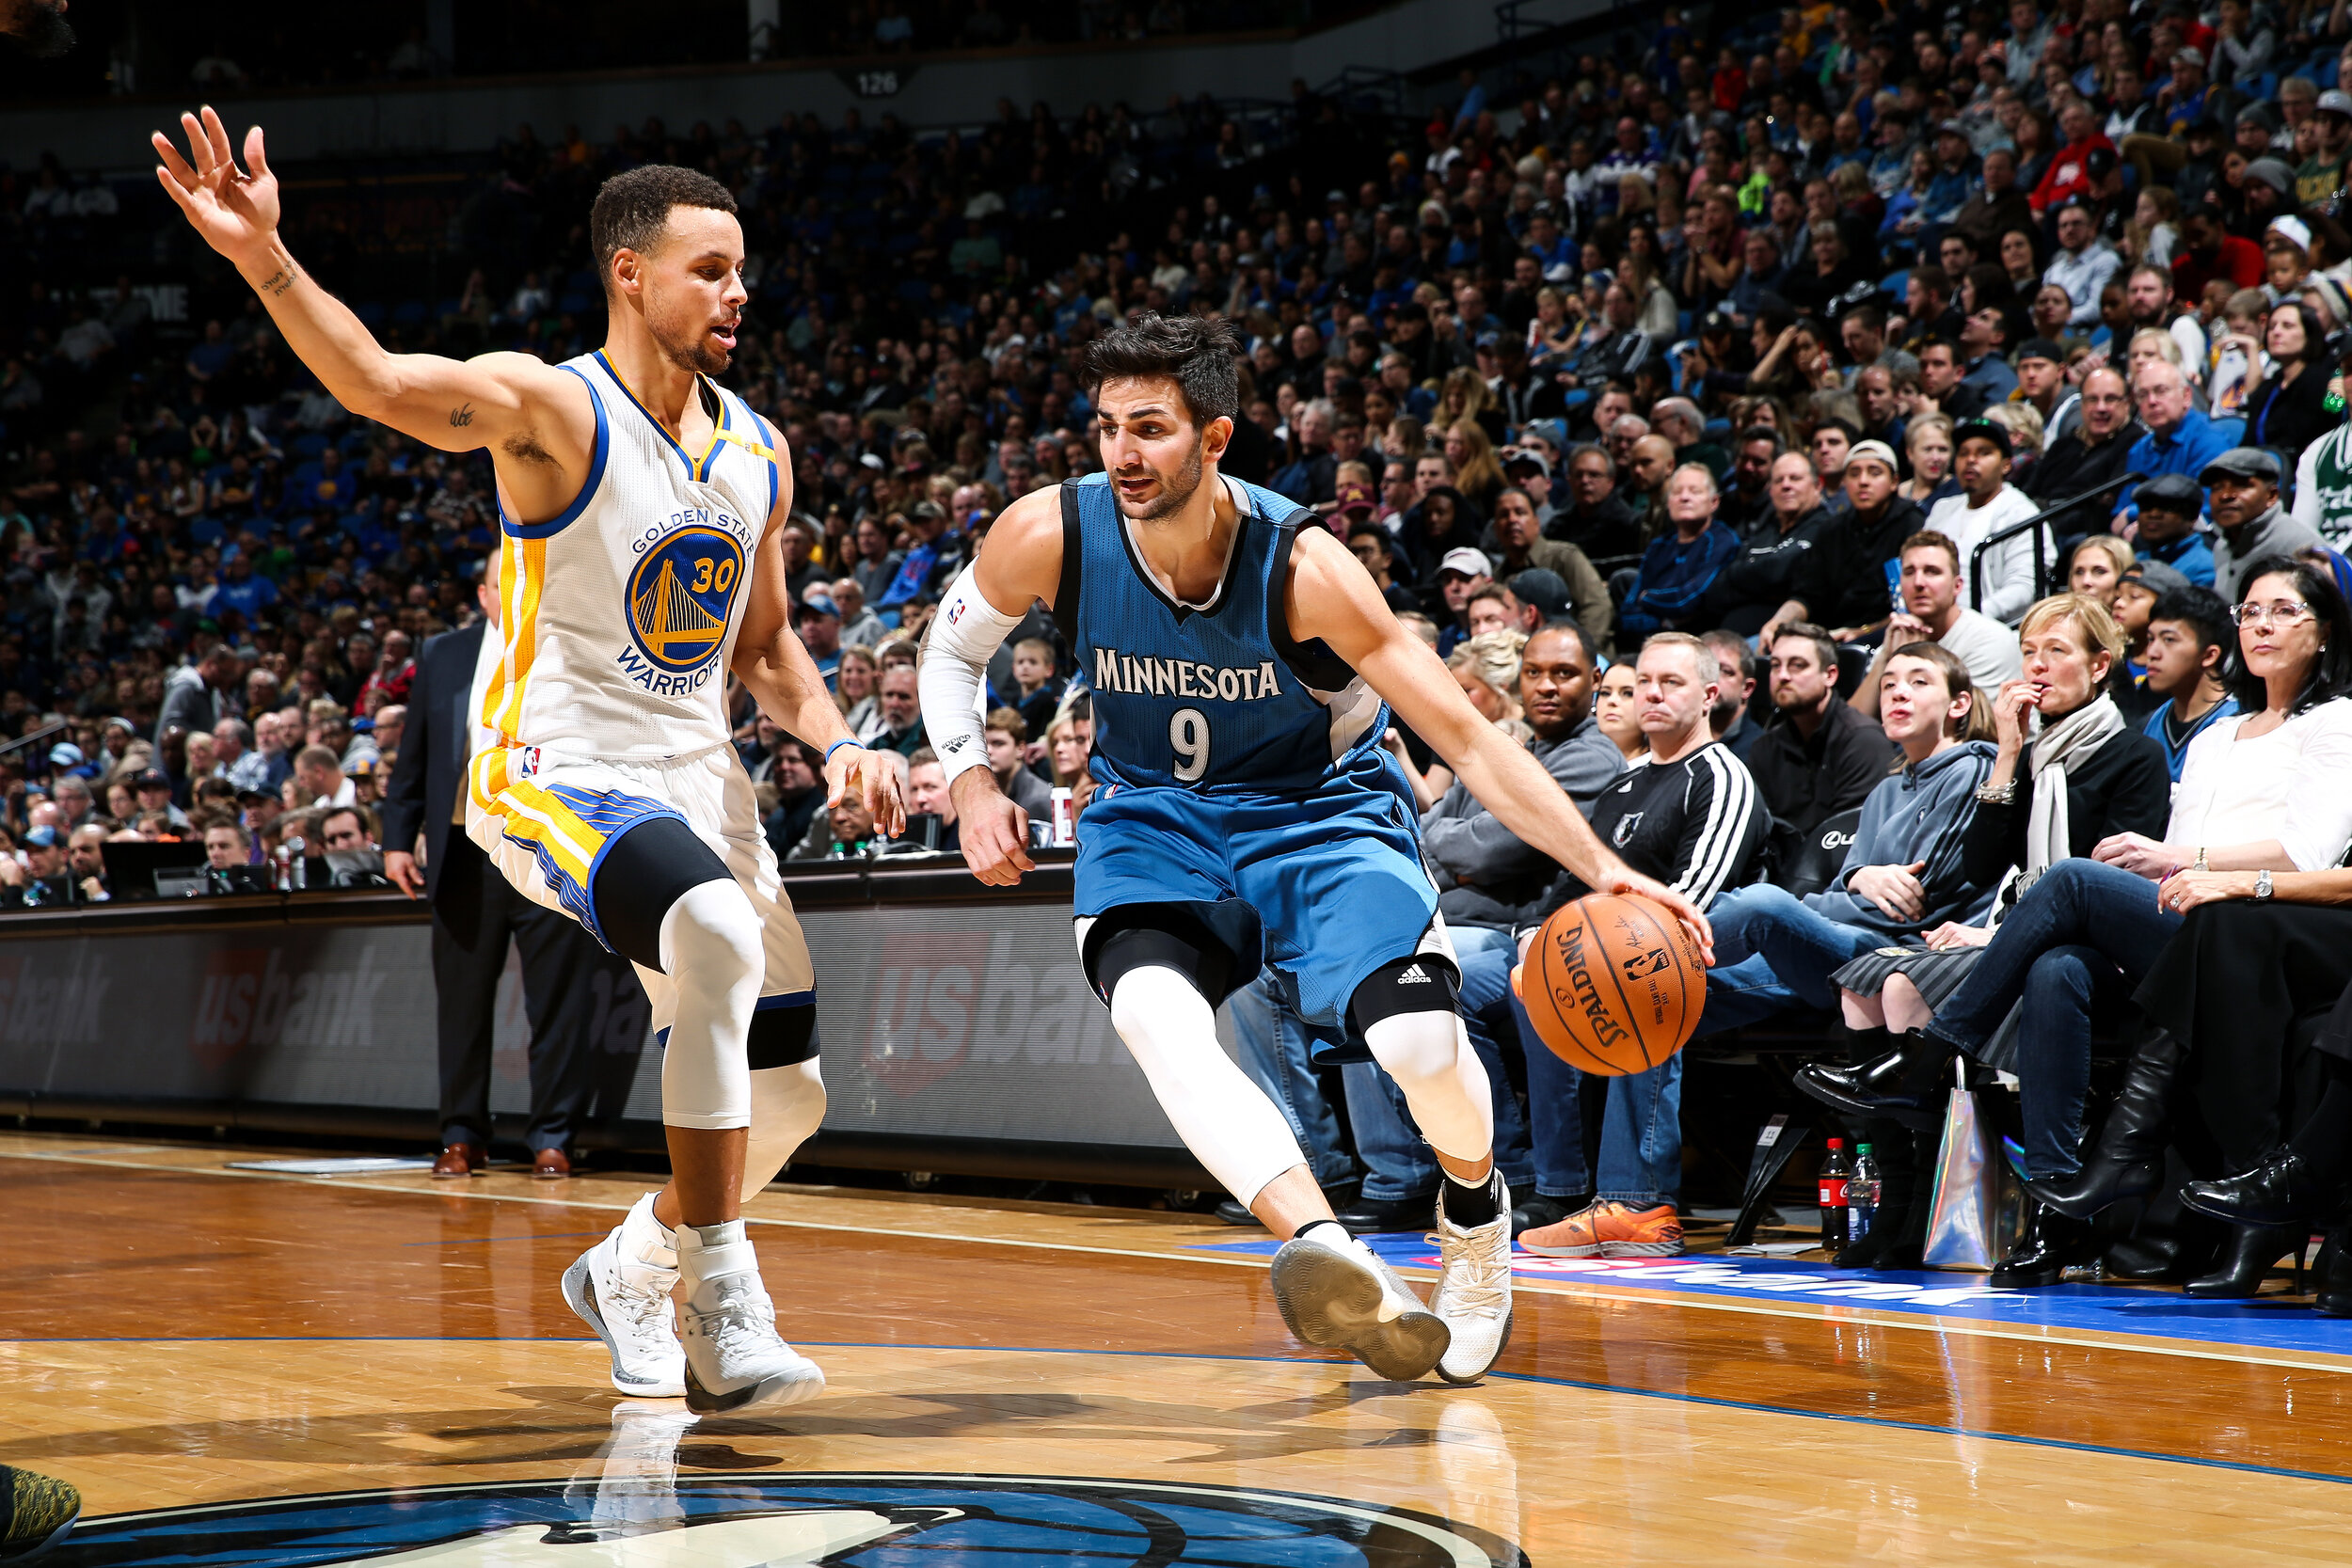  Ricky Rubio and Stephen Curry  Golden State Warriors v. Minnesota Timberwolves, 2016  